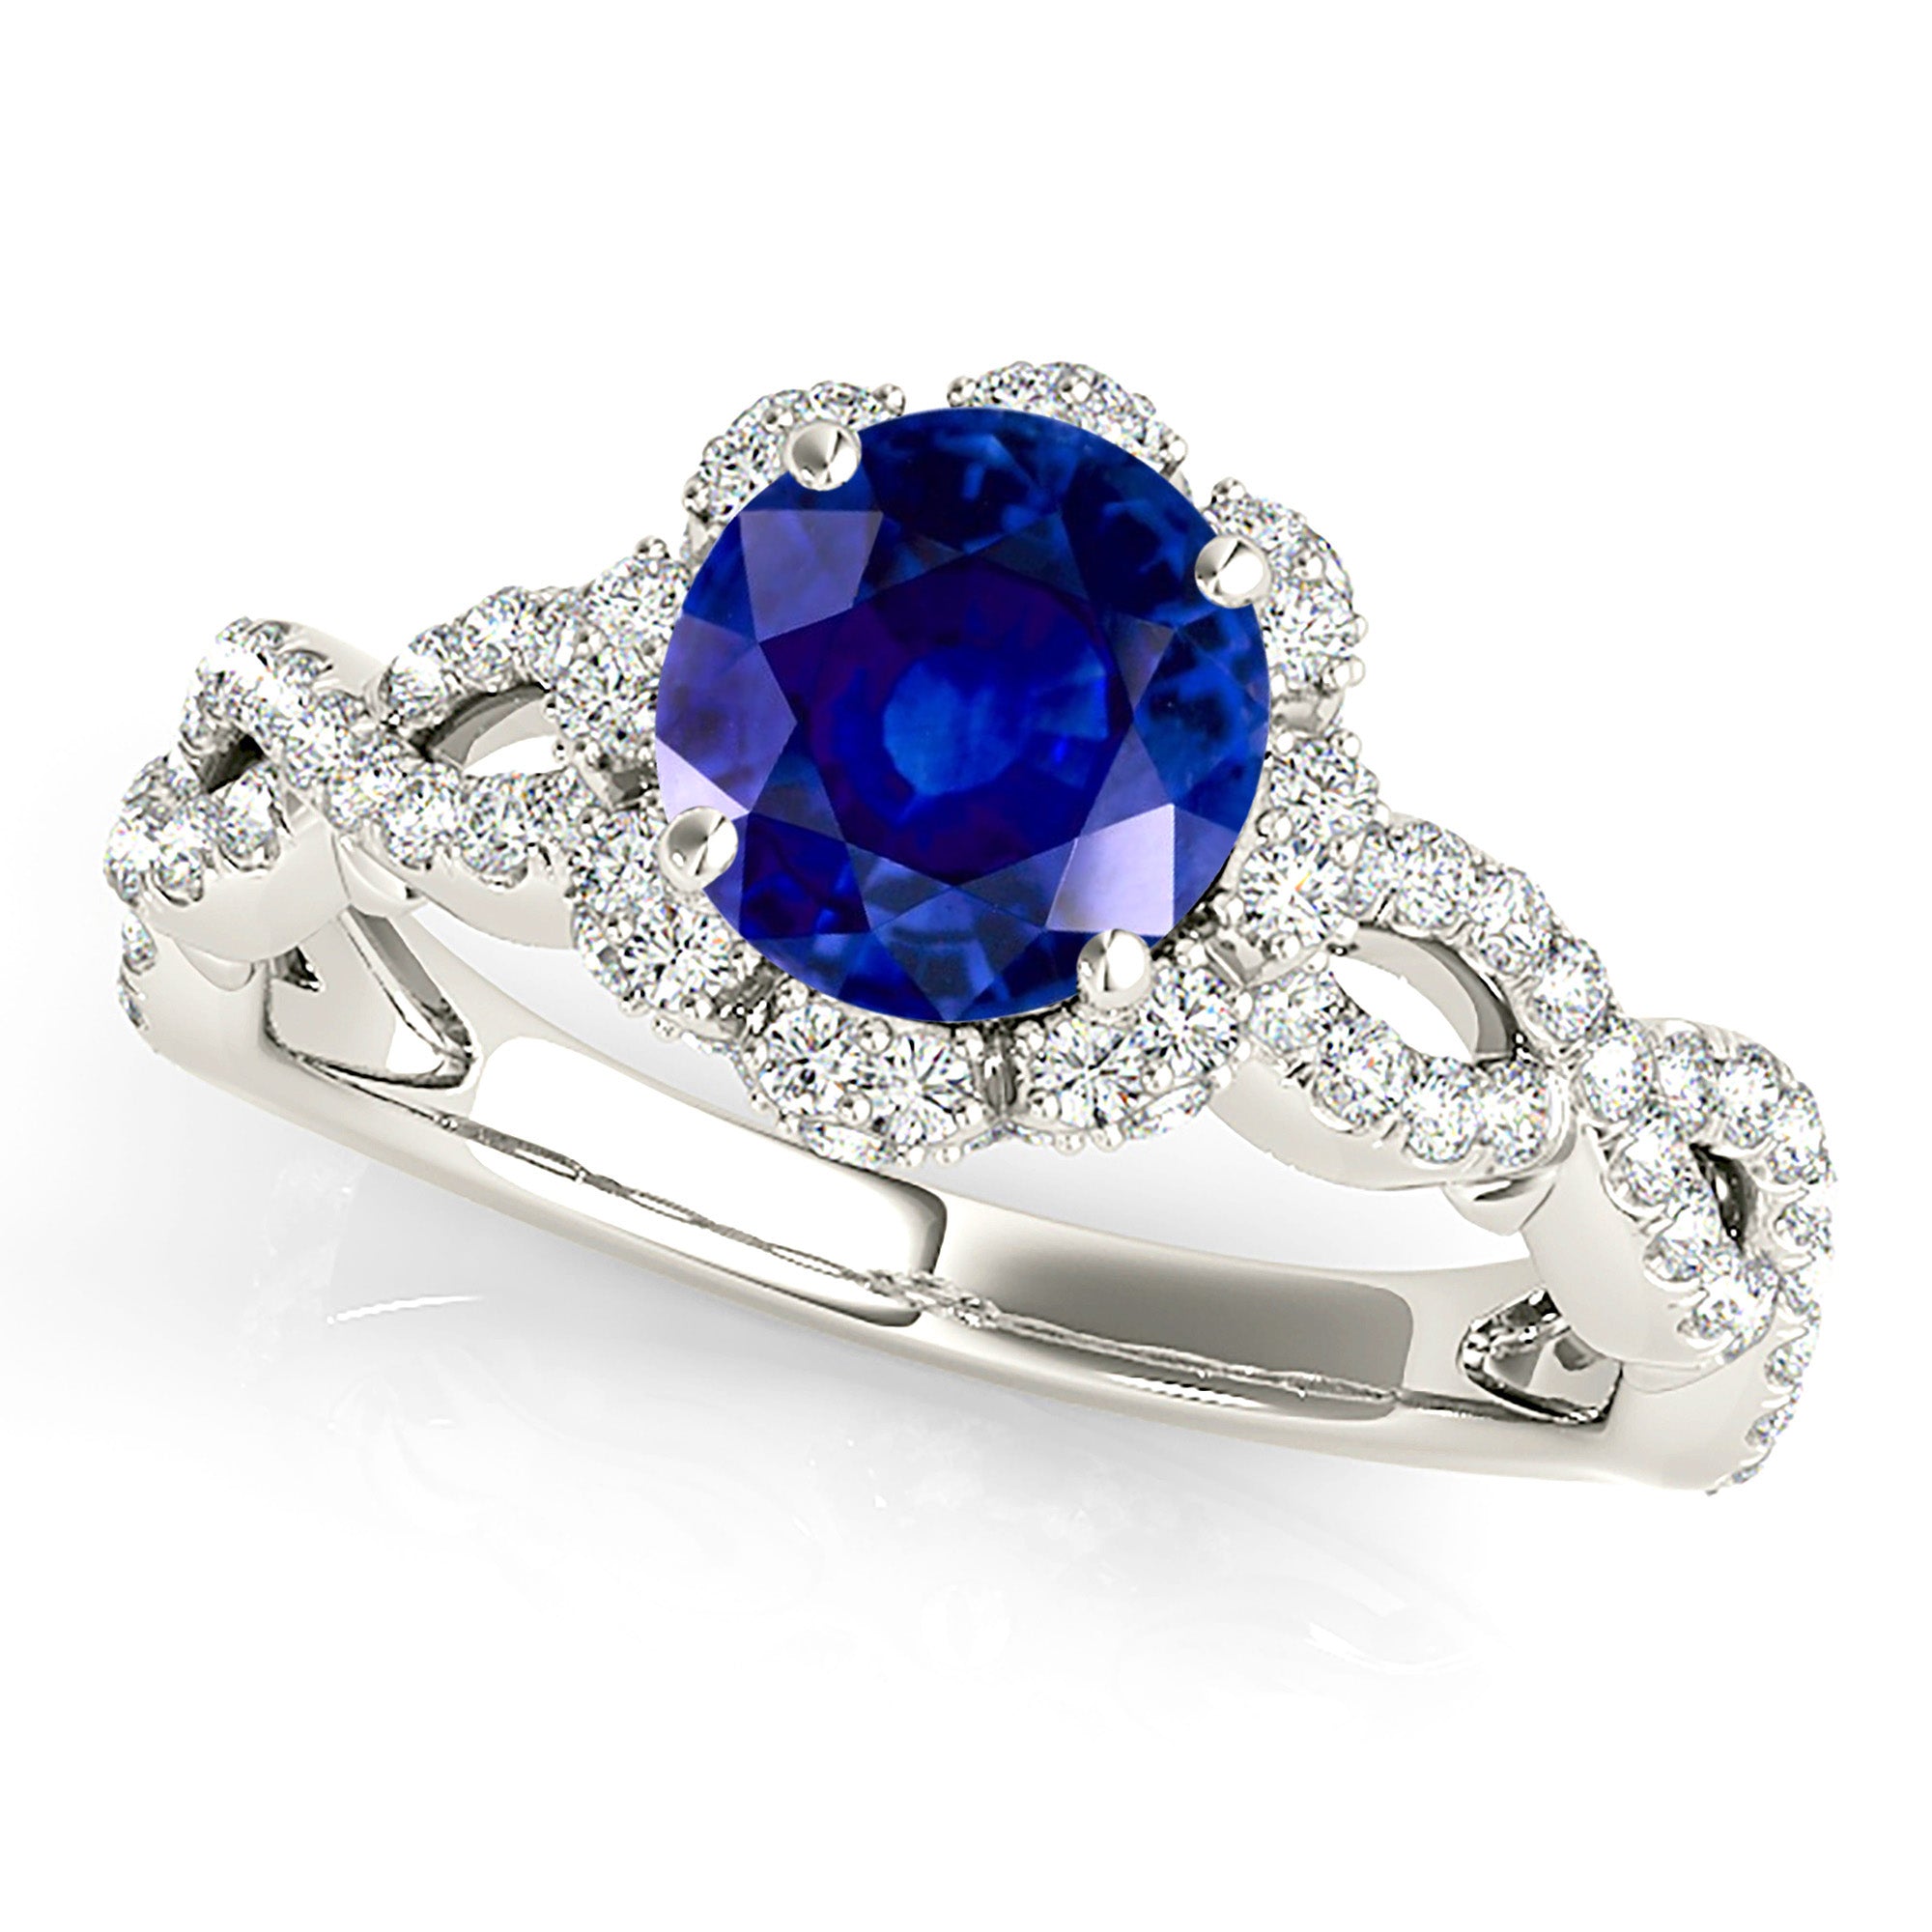 1.35 ct. Genuine Blue Sapphire Ring With 0.70 ctw. Diamond Floral Halo, Open Braided Diamond Band | Natural Sapphire And Diamond Ring-in 14K/18K White, Yellow, Rose Gold and Platinum - Christmas Jewelry Gift -VIRABYANI